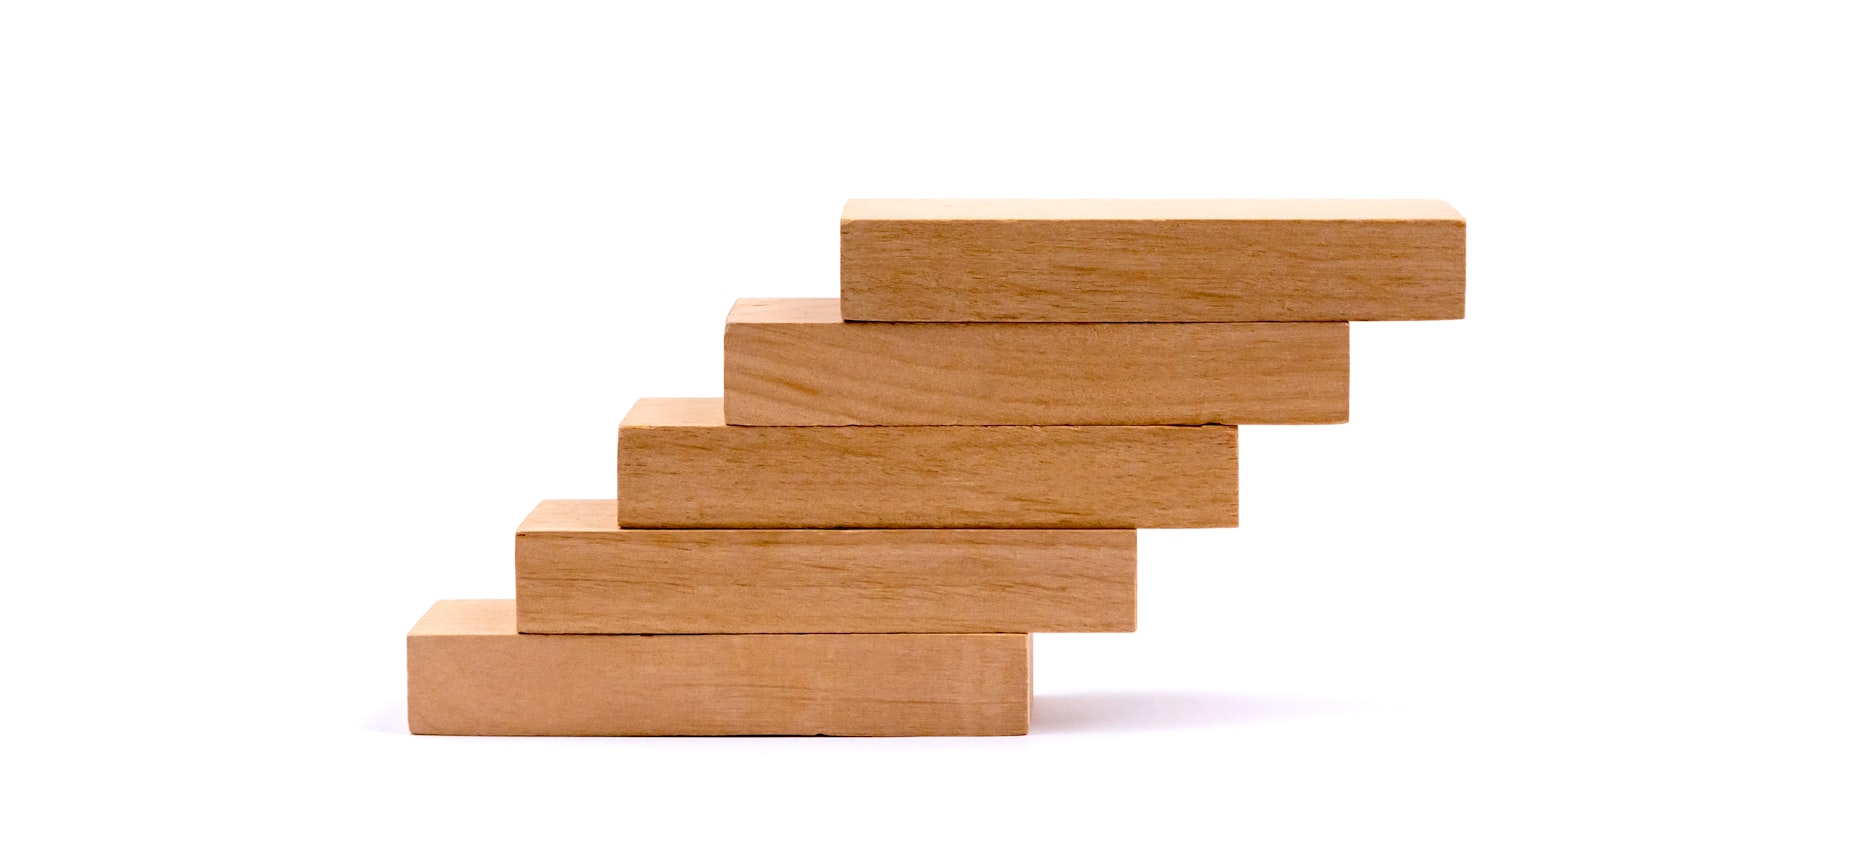 Wood block stacking as step stair, concept for progress